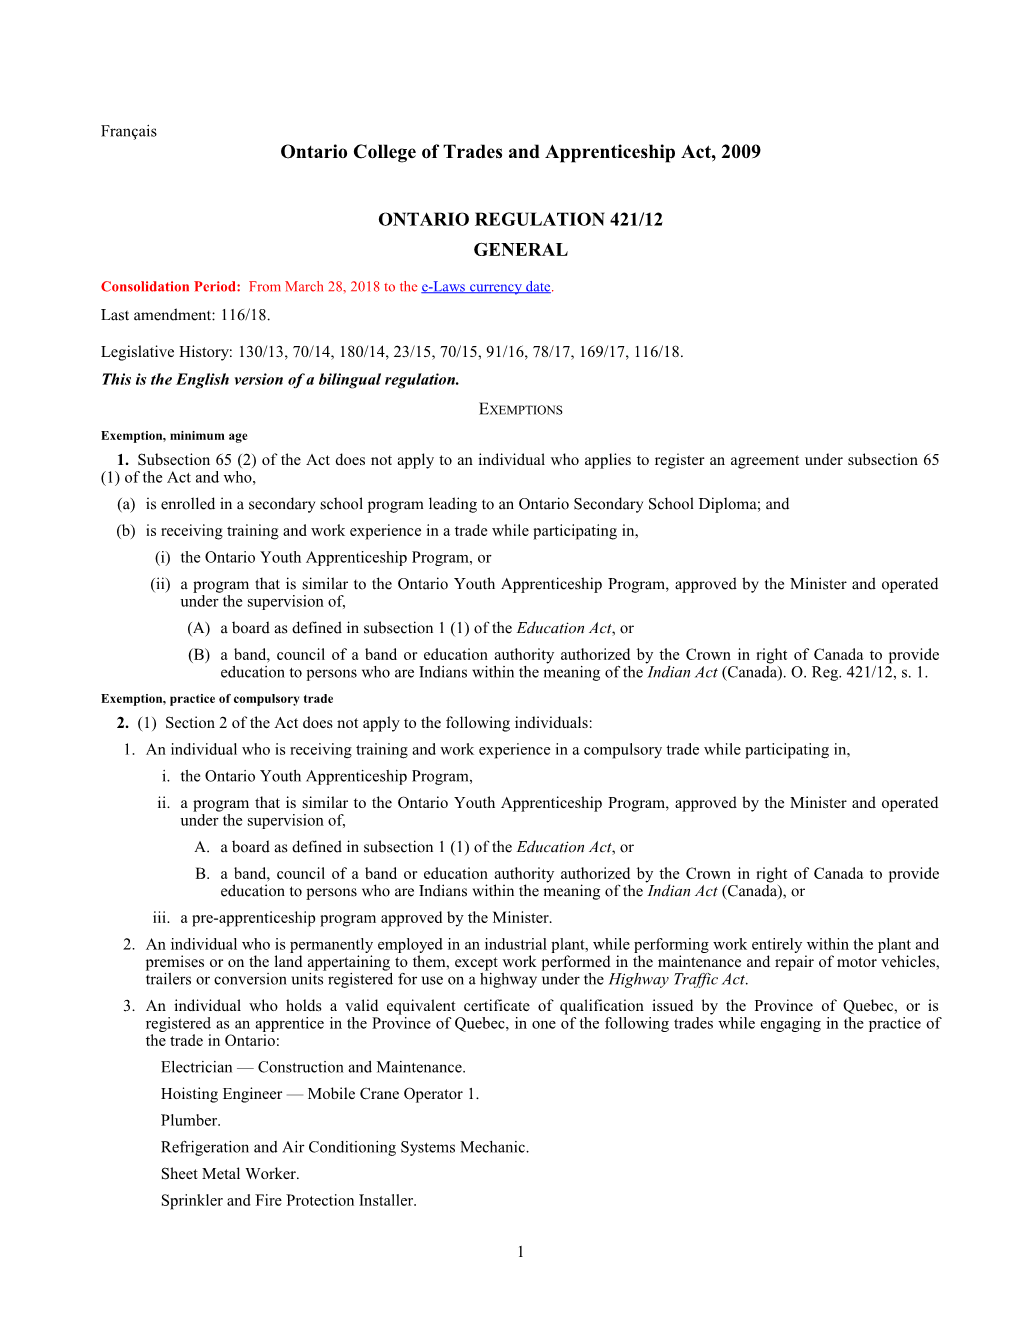 Ontario College of Trades and Apprenticeship Act, 2009 - O. Reg. 421/12